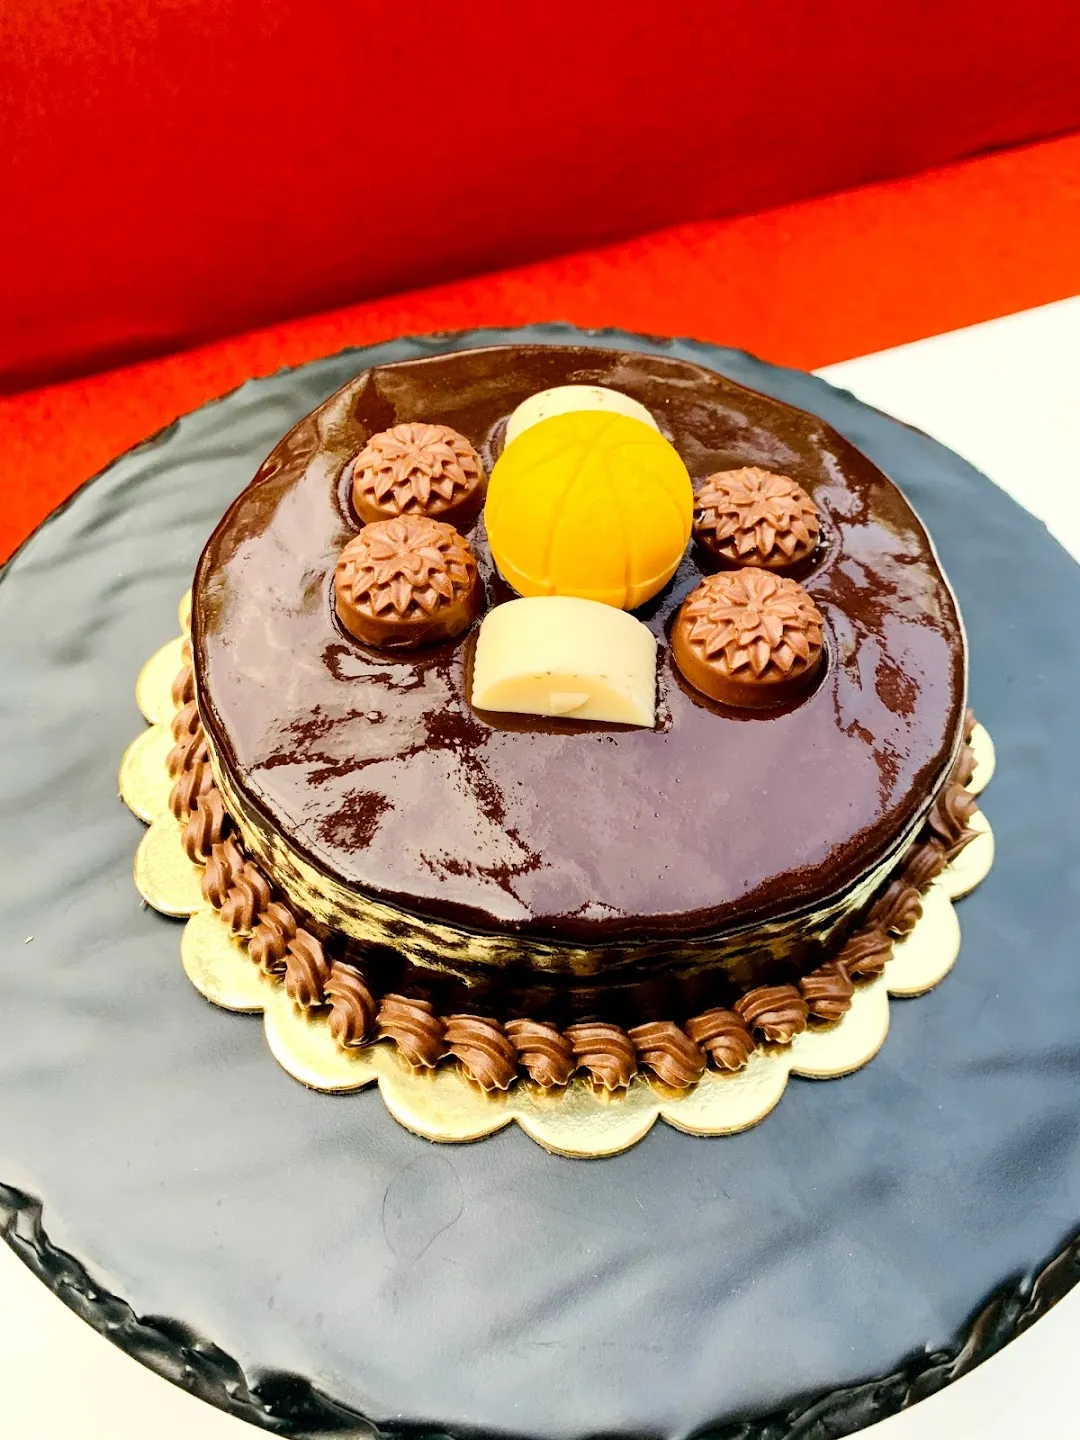 Better Together Chocolate Vanilla Cake, 24x7 Home delivery of Cake in  Bilaspur Gurgaon, Gurgaon